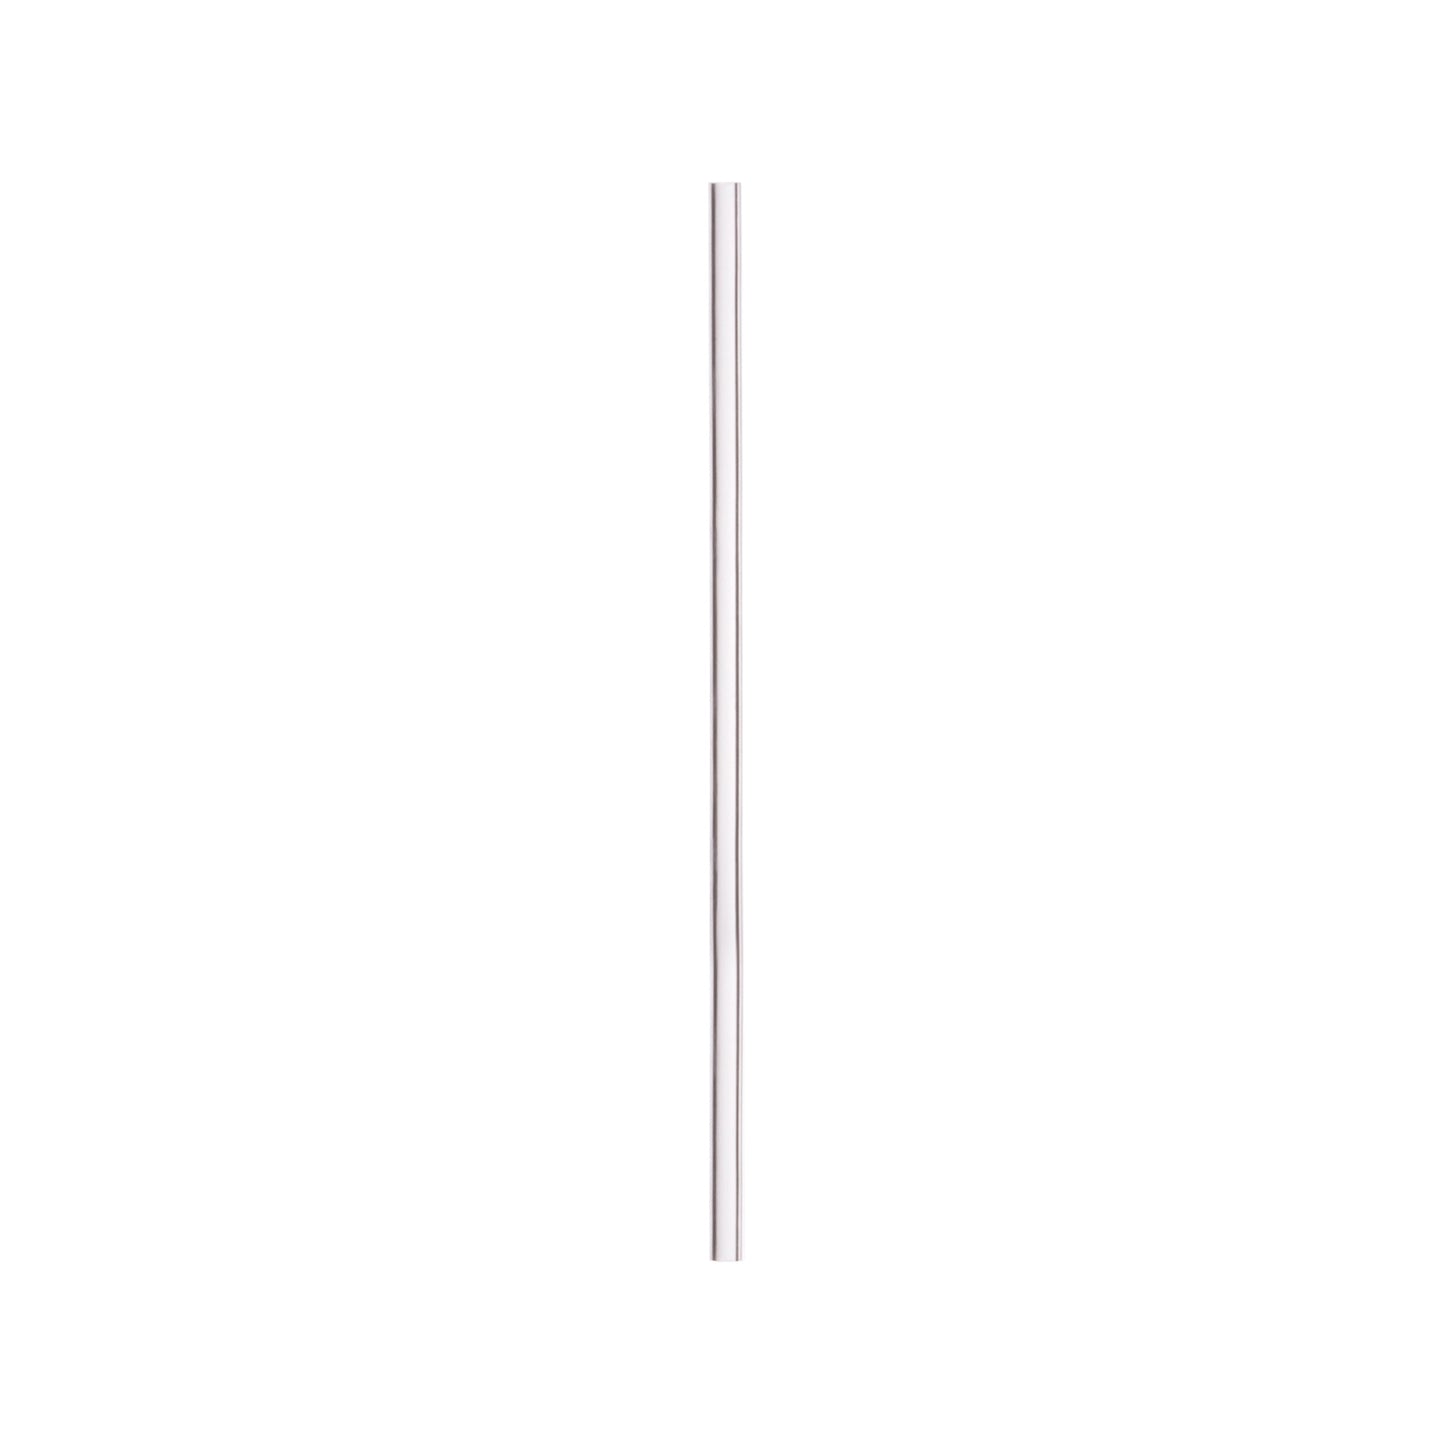 BUSWELL® STRAWS REUSABLE – CLEAR - 7 7/8in / 200pcs